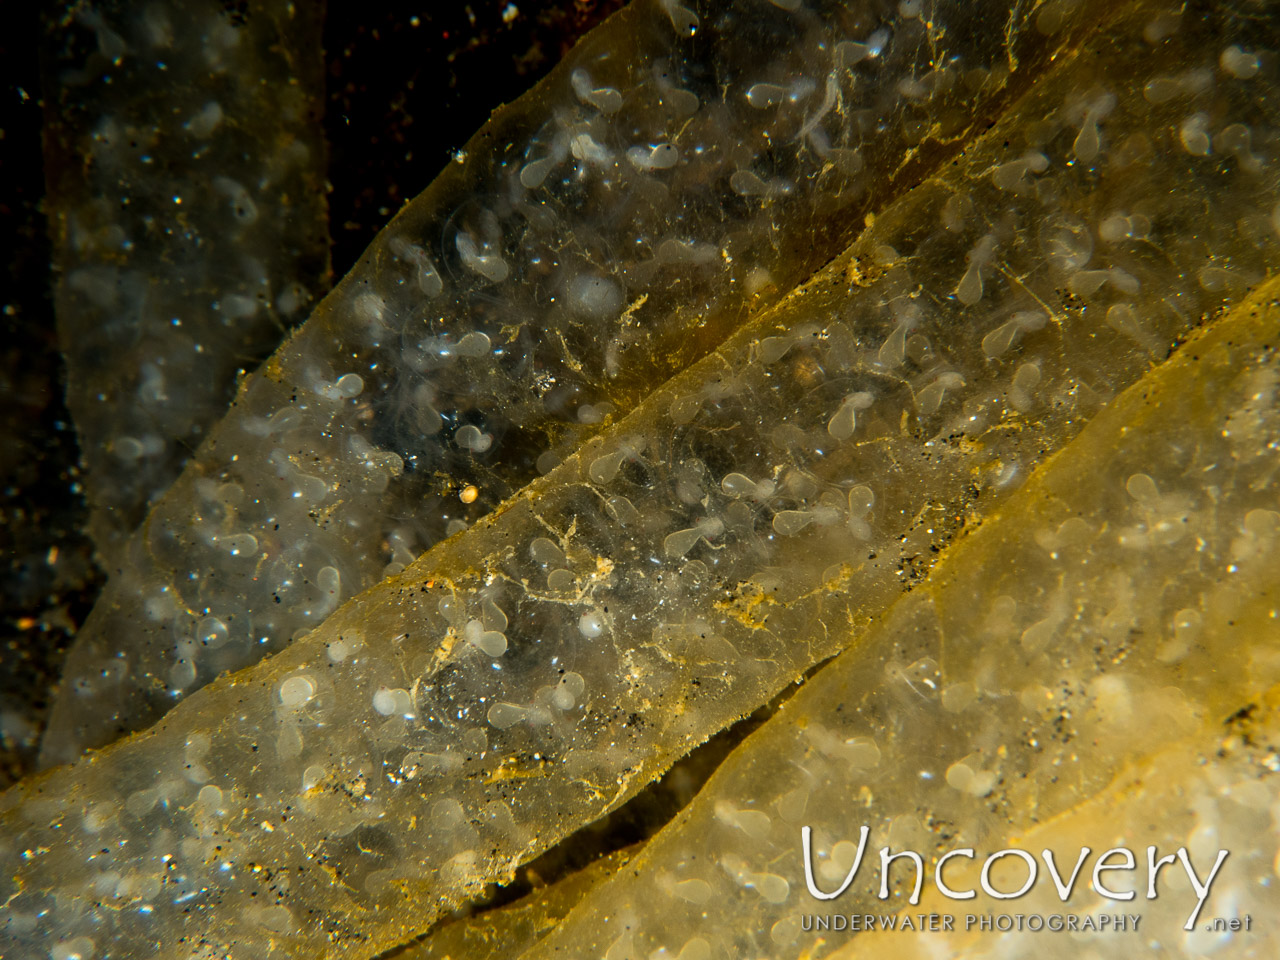 Eggs, Squid, photo taken in Indonesia, North Sulawesi, Lembeh Strait, Hairball